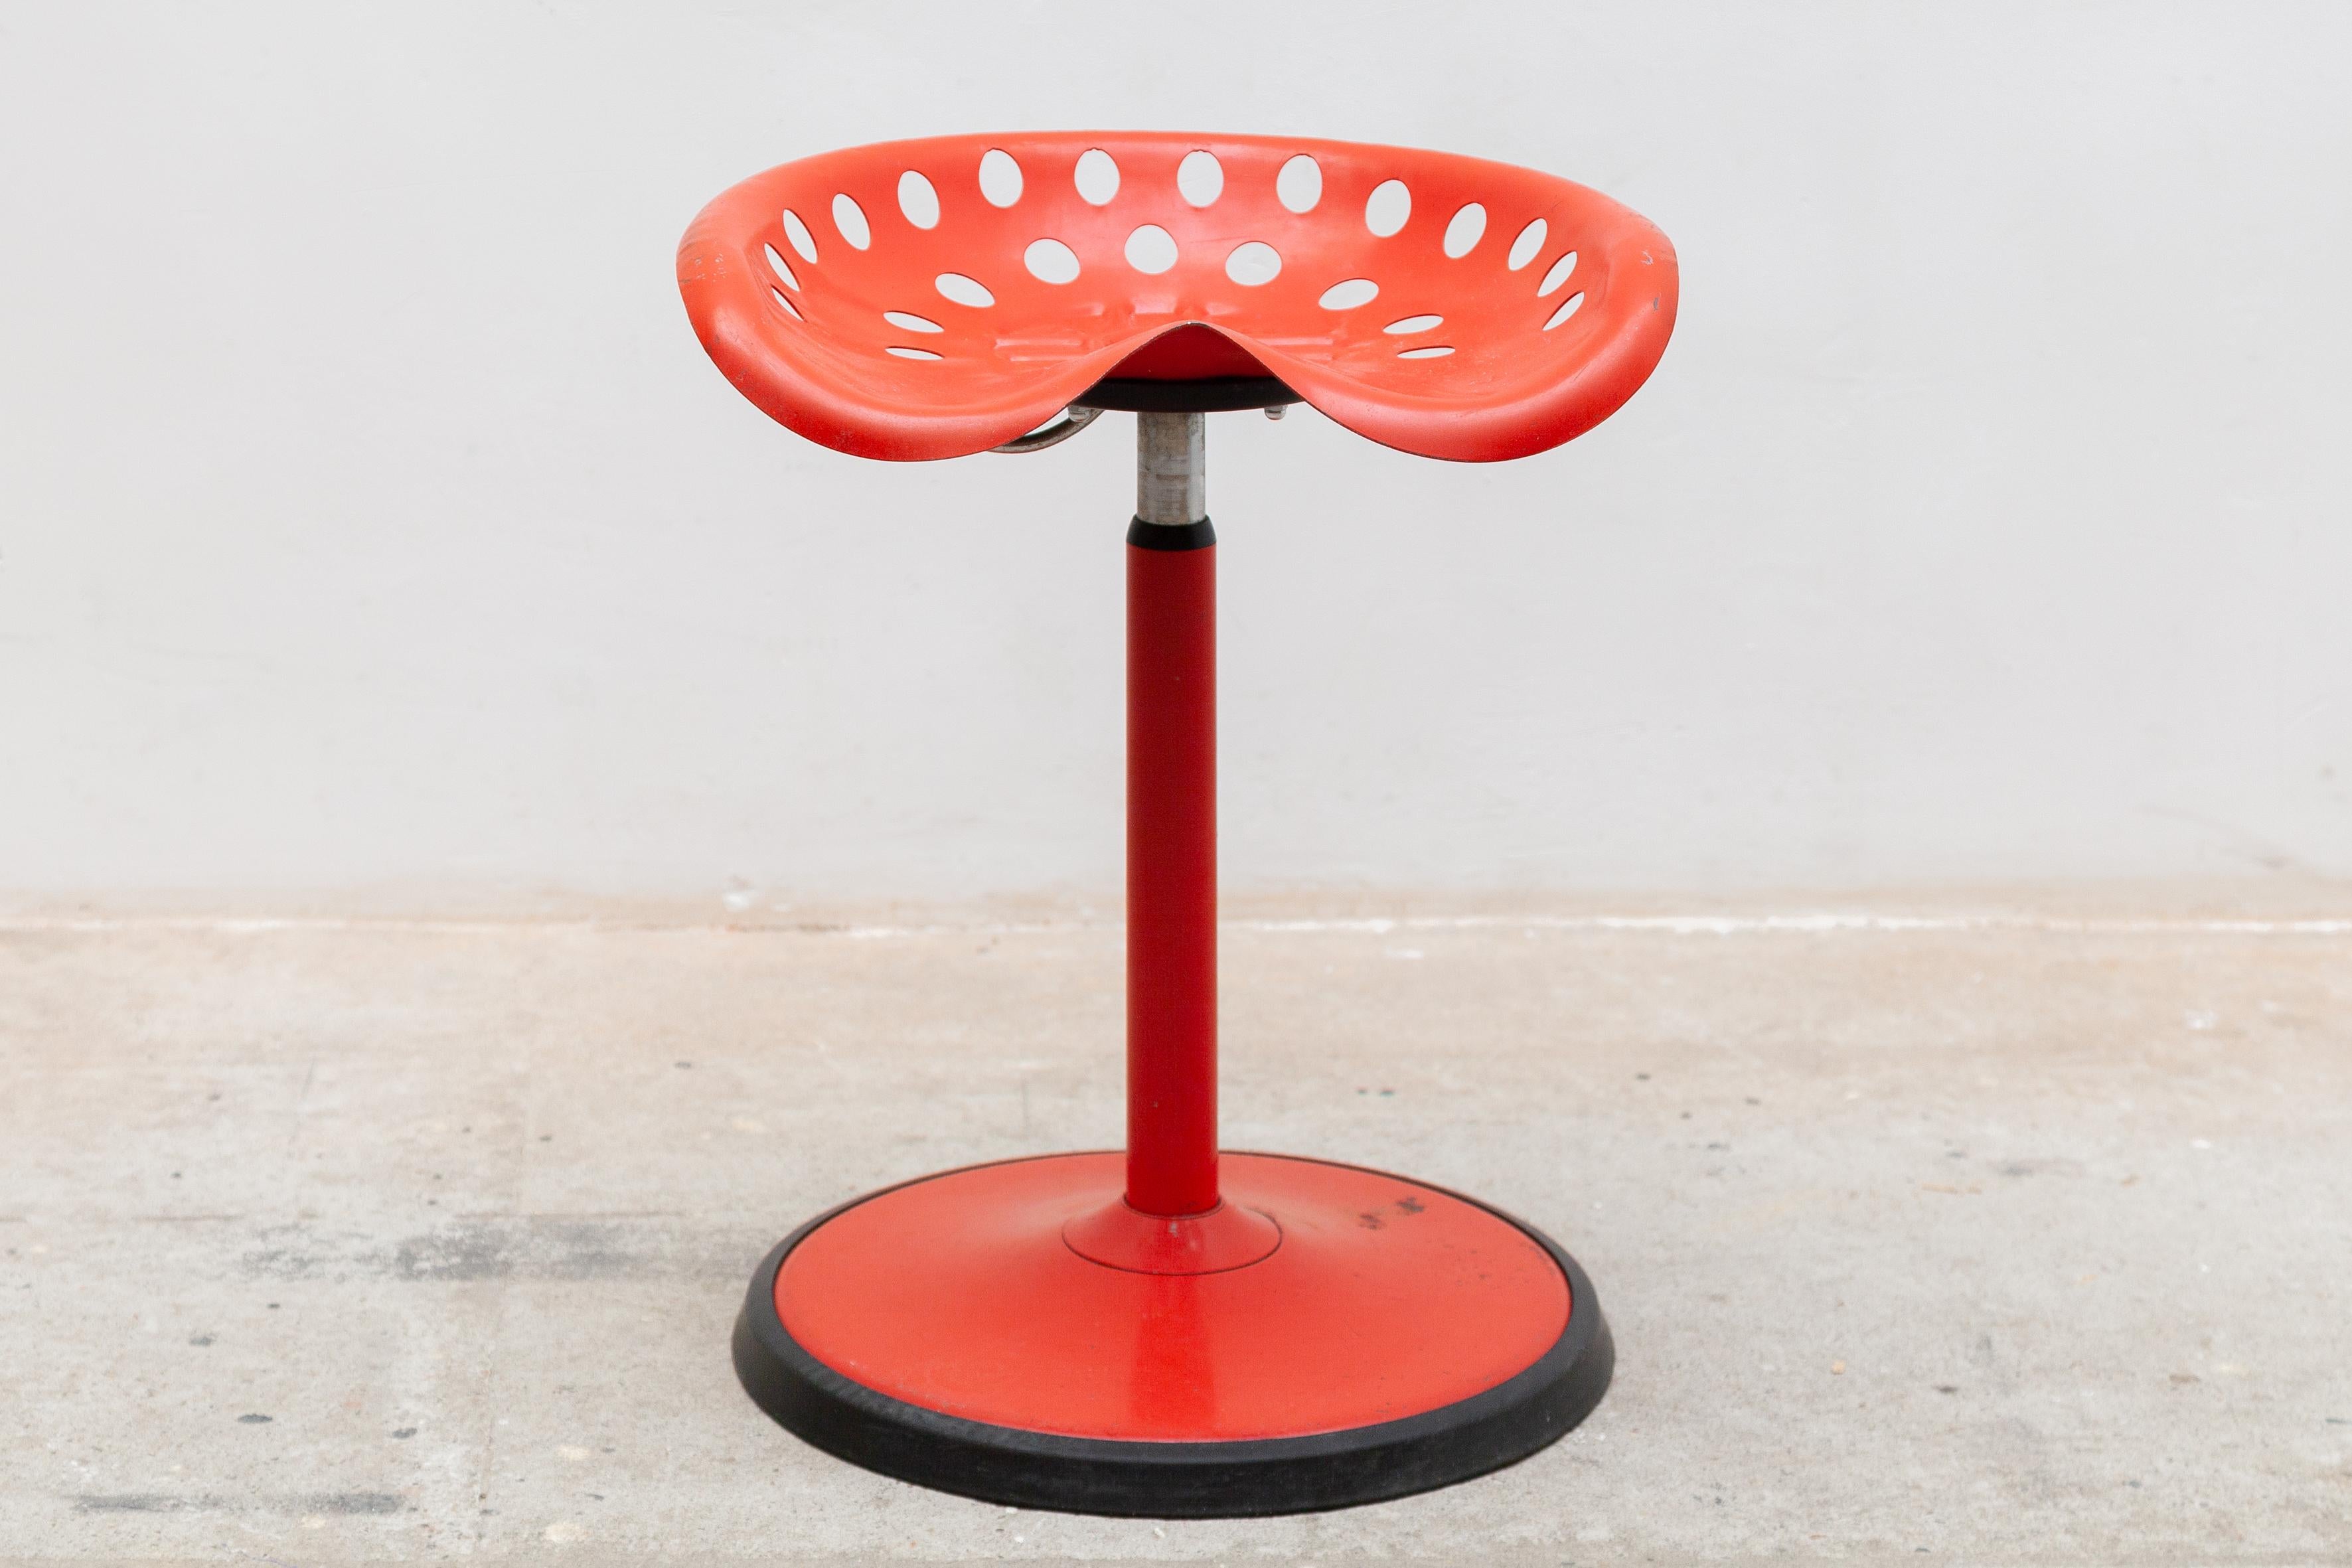 Late 20th Century Red Tractor Seat Stool Designed by Etienne Fermigier for Mirima, France